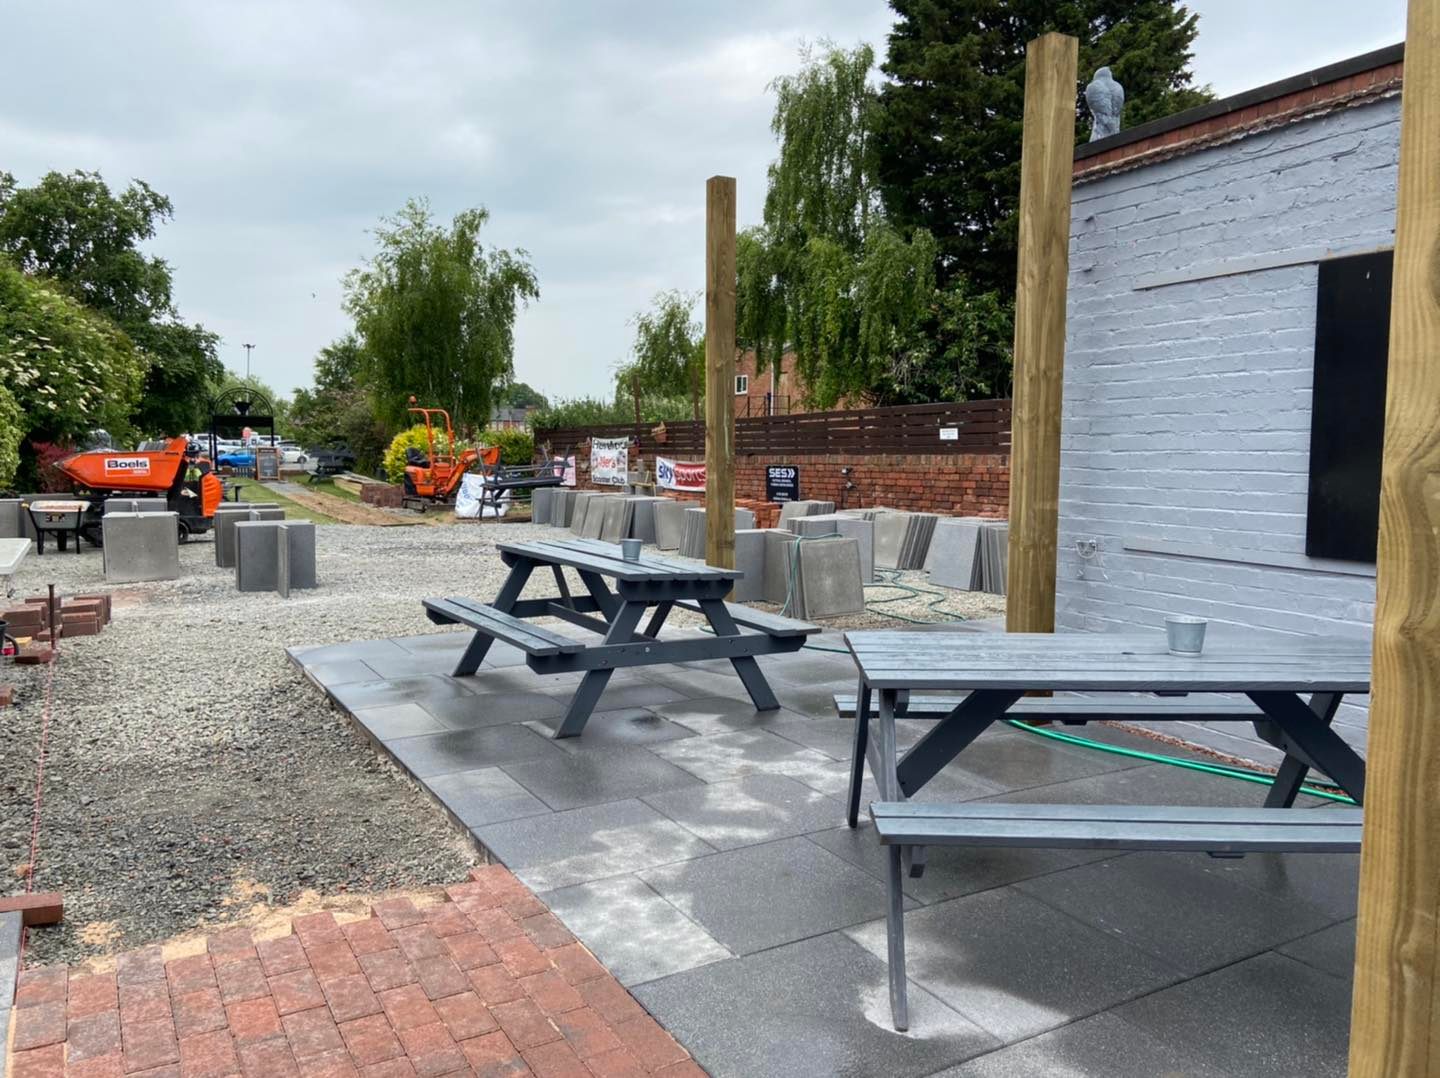 GALLERY | Extensive refurbishment of beer garden taking place at a popular pub in Hereford